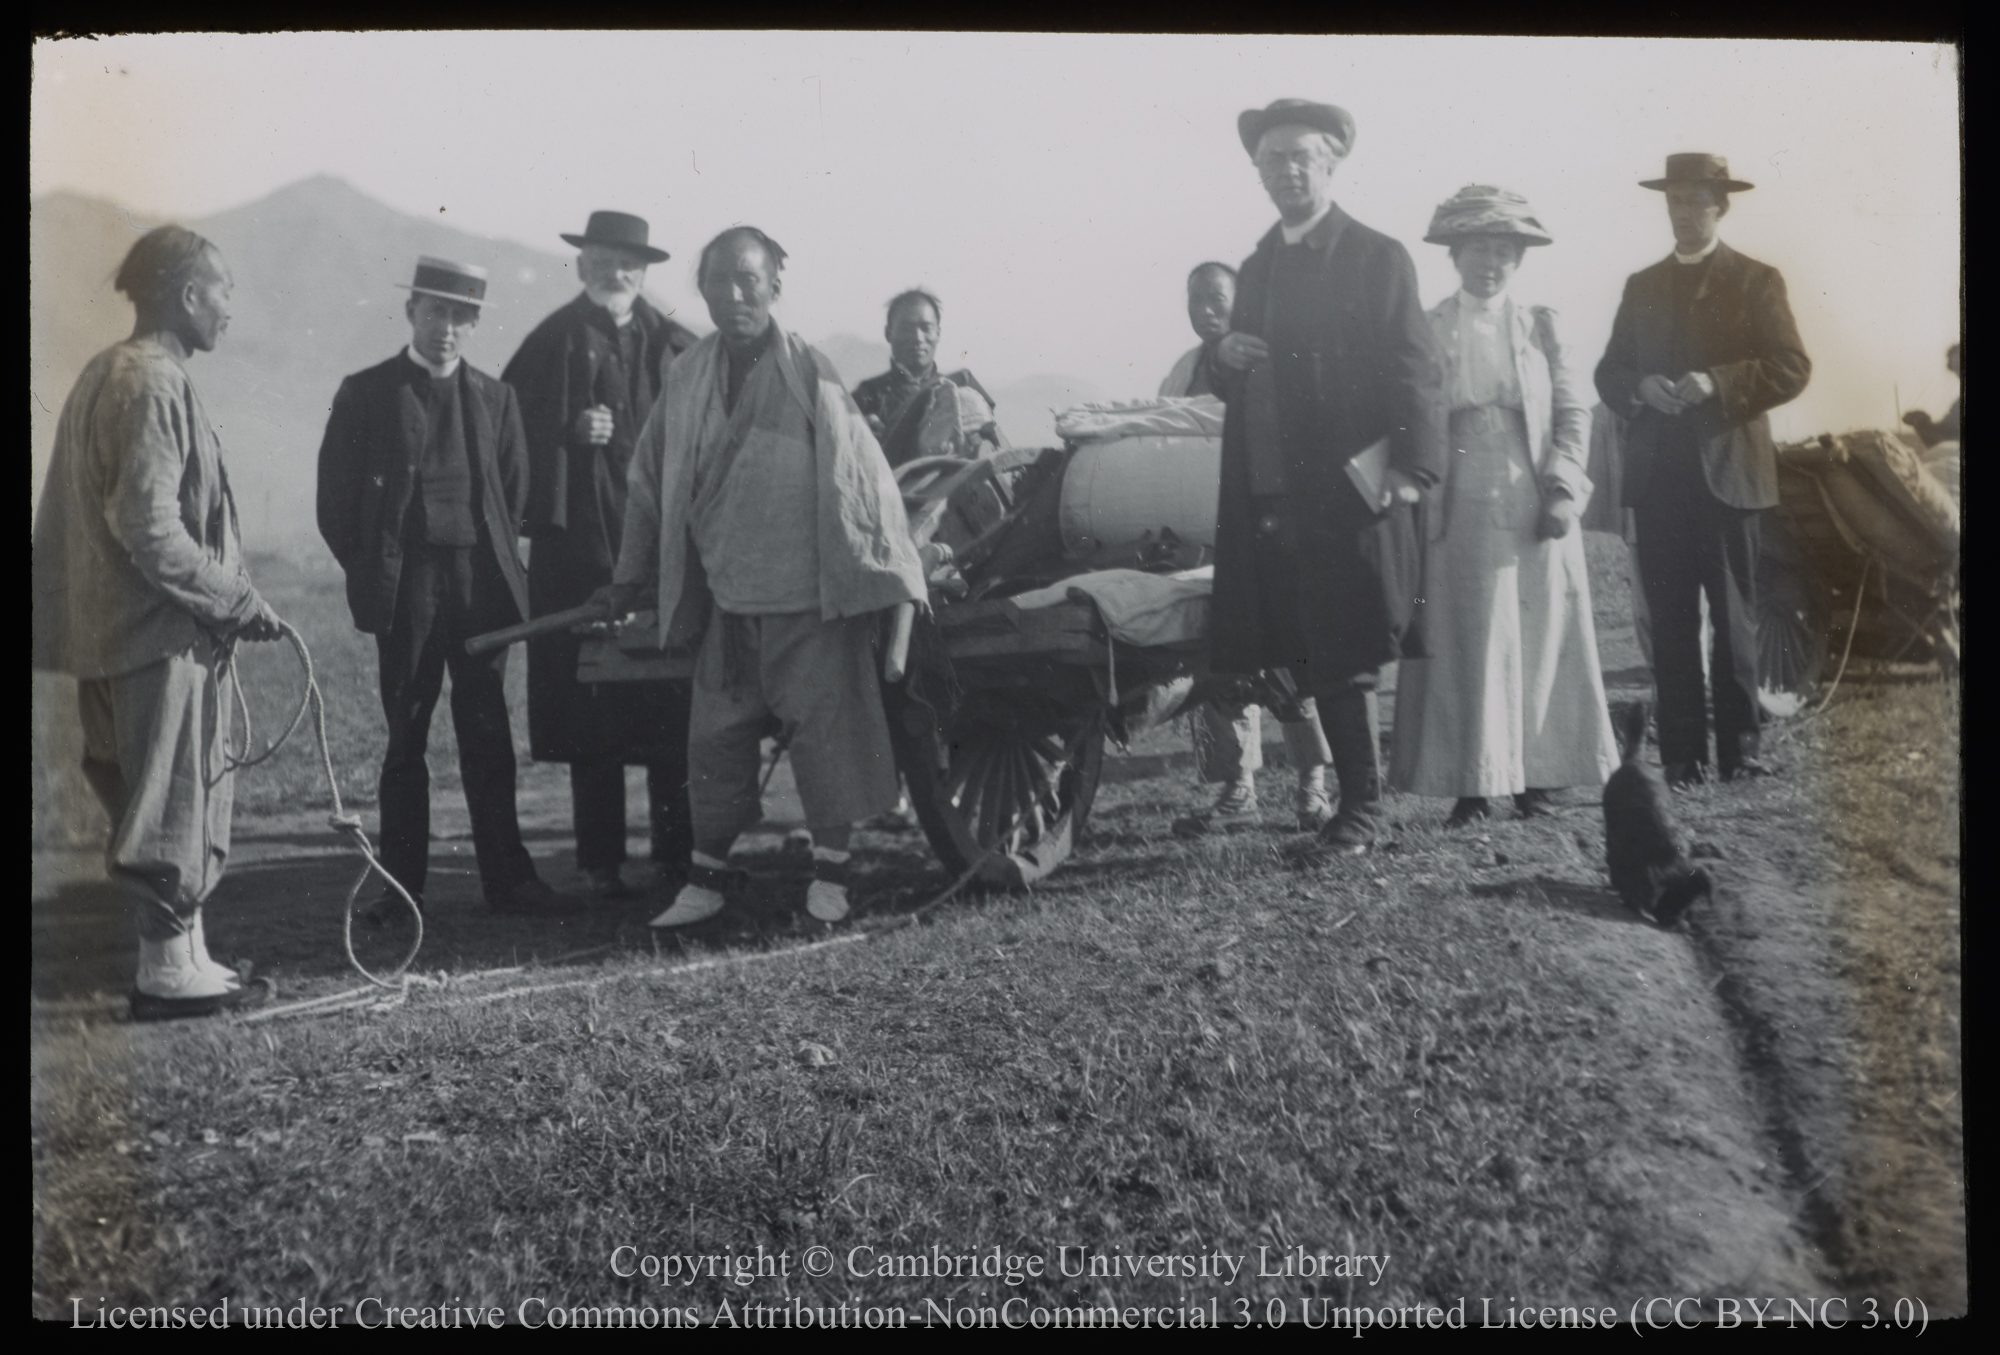 Rev. J. Hunter and the Rev. and Mrs Matthews and others standing by wheelbarrow, 1900 - 1920